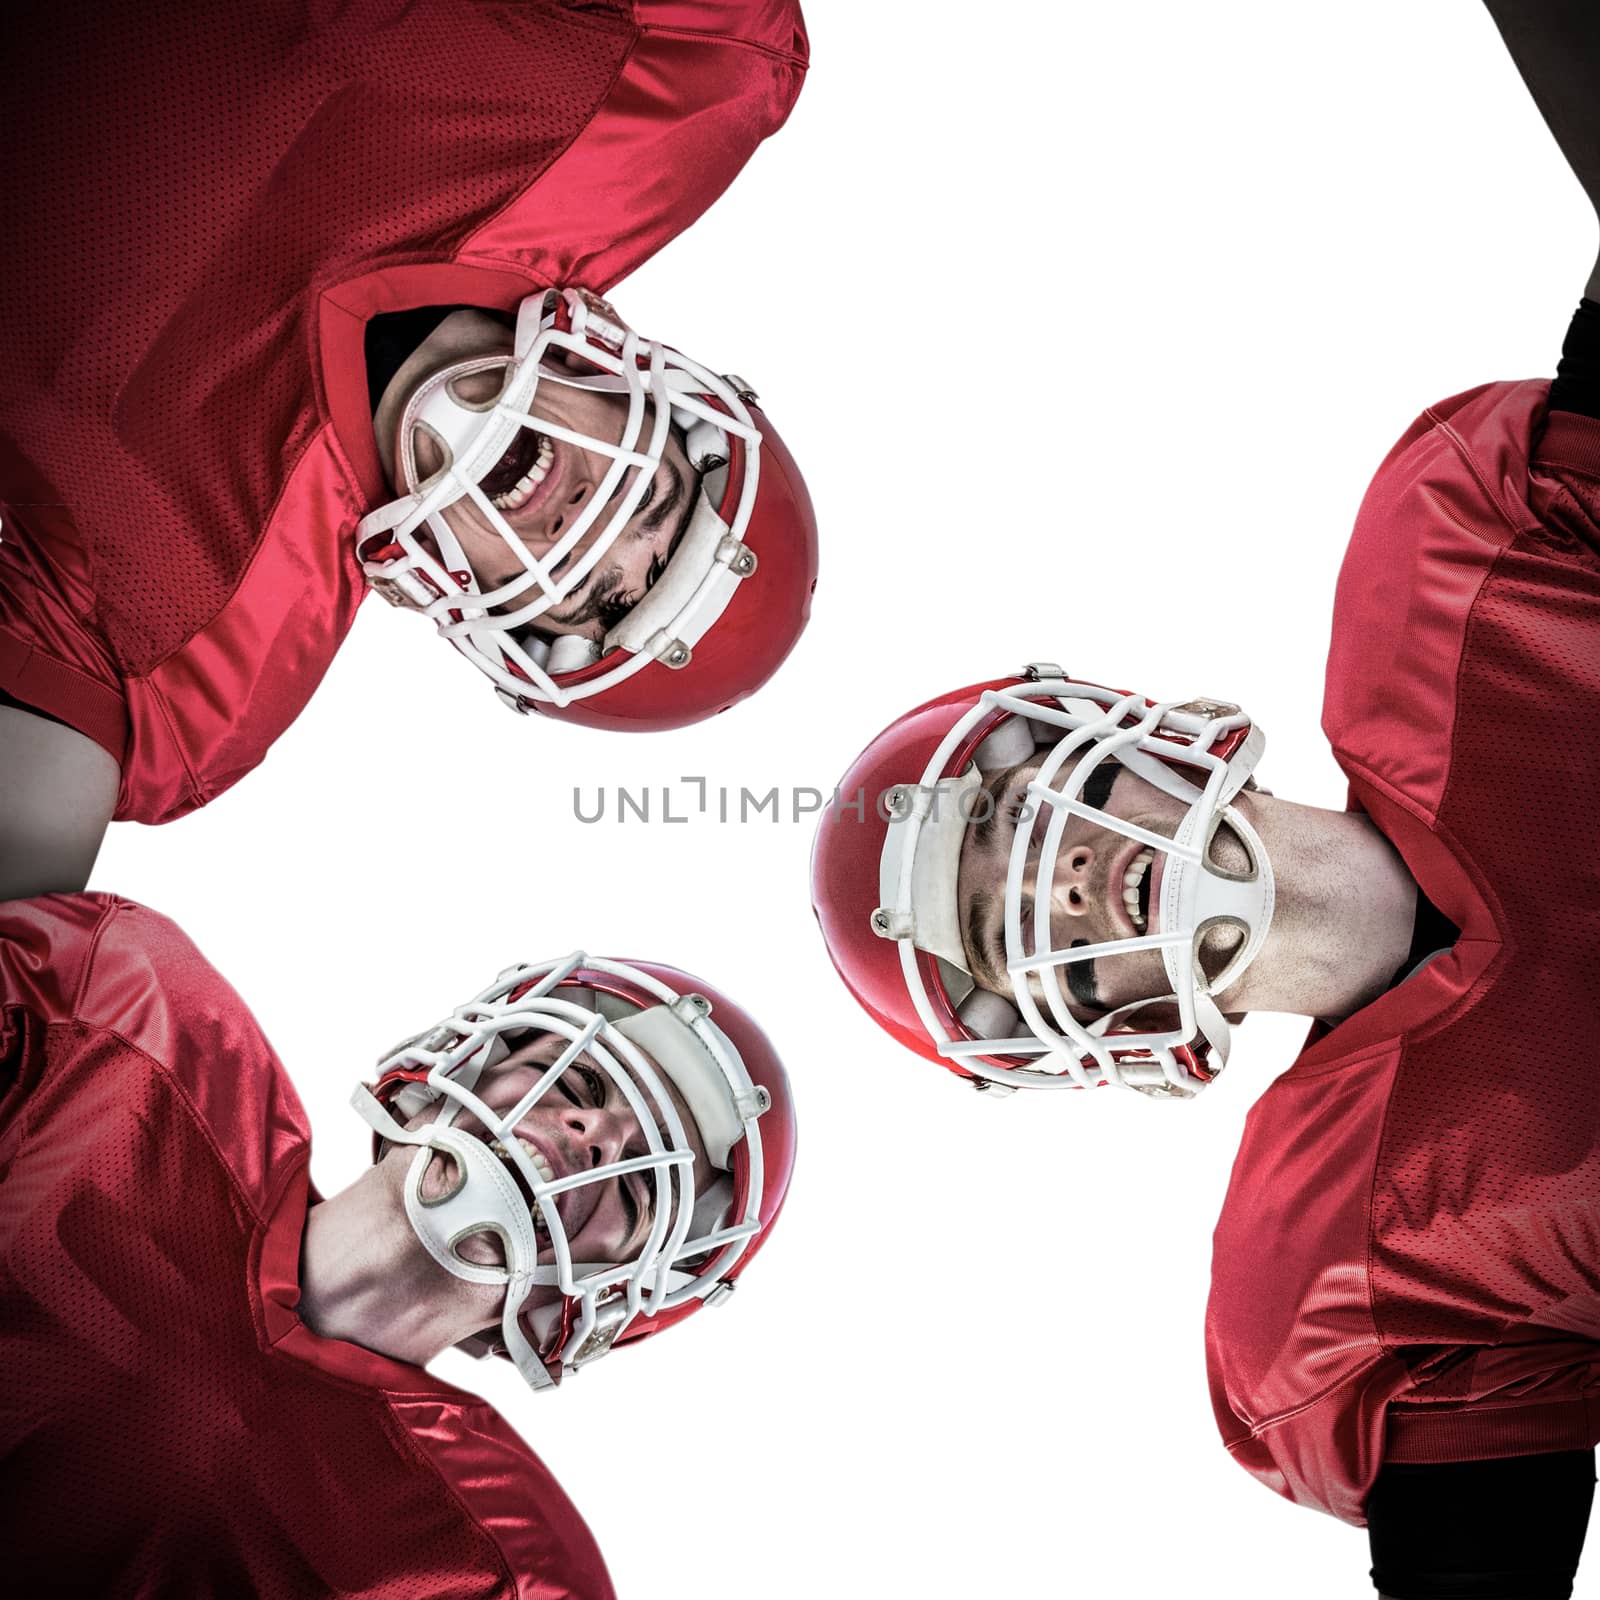 American football huddle against white background with vignette